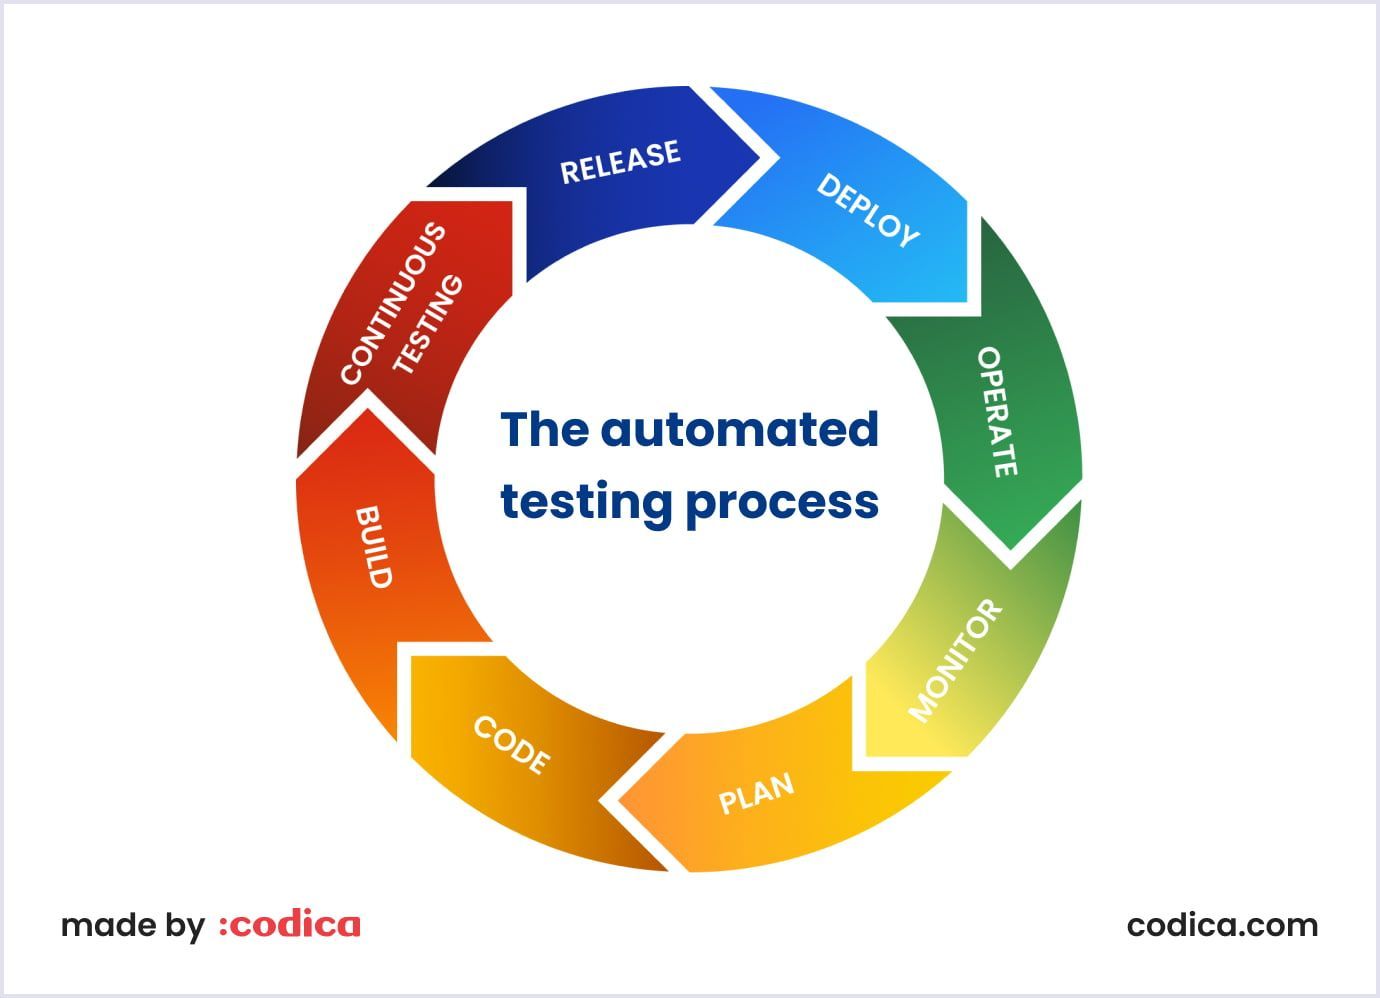 The automating testing process